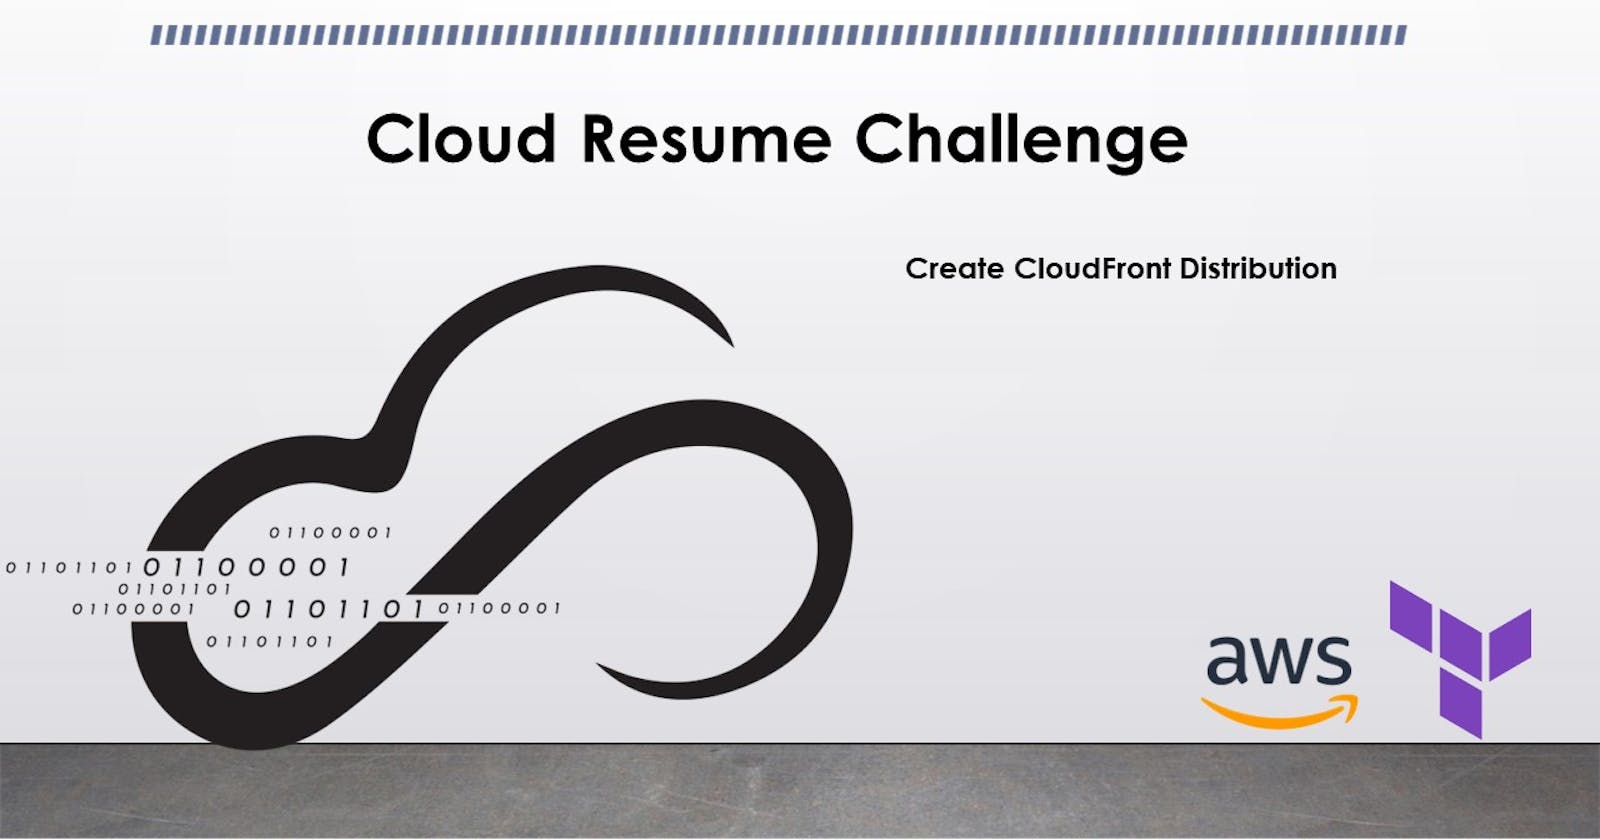 5. Cloud Resume Challenge: Creating CloudFront Distribution